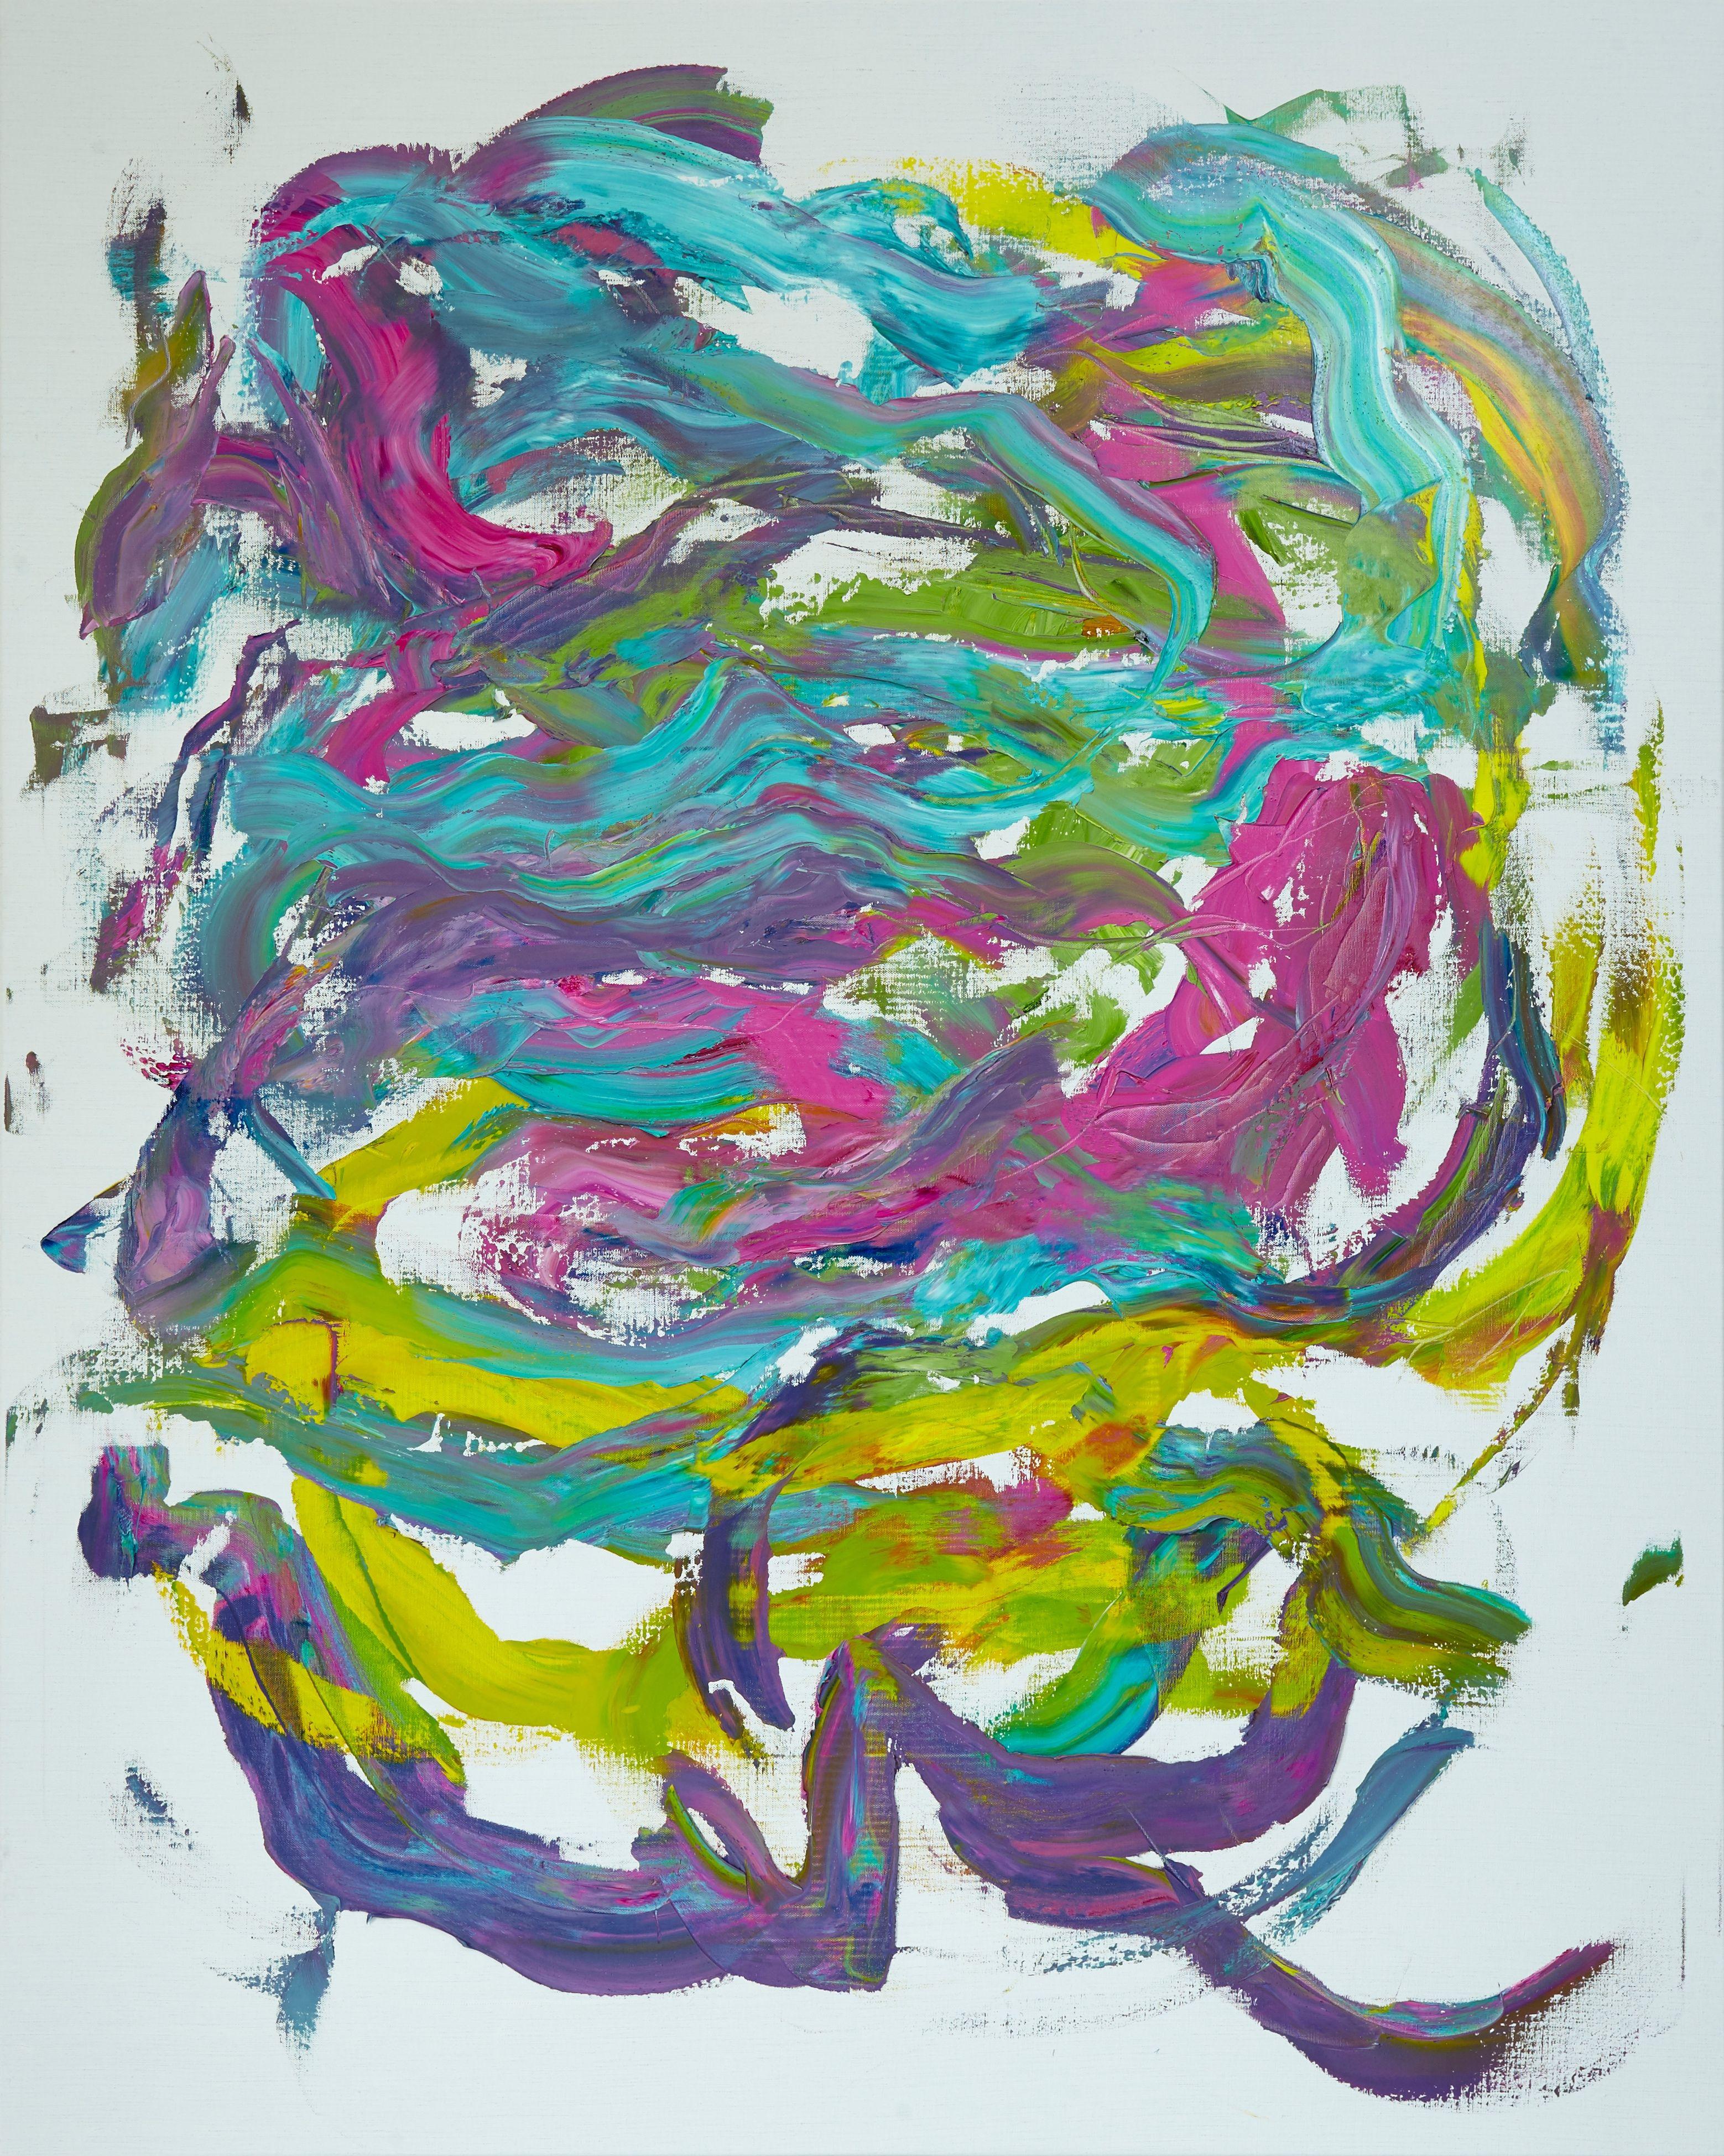 Vibrant oil swirled to explore movement. This is part of the artists ongoing practice, where he intuitively paints for a few hours each day, allowing for his mood and perception of the day to influence the work. :: Painting :: Abstract :: This piece